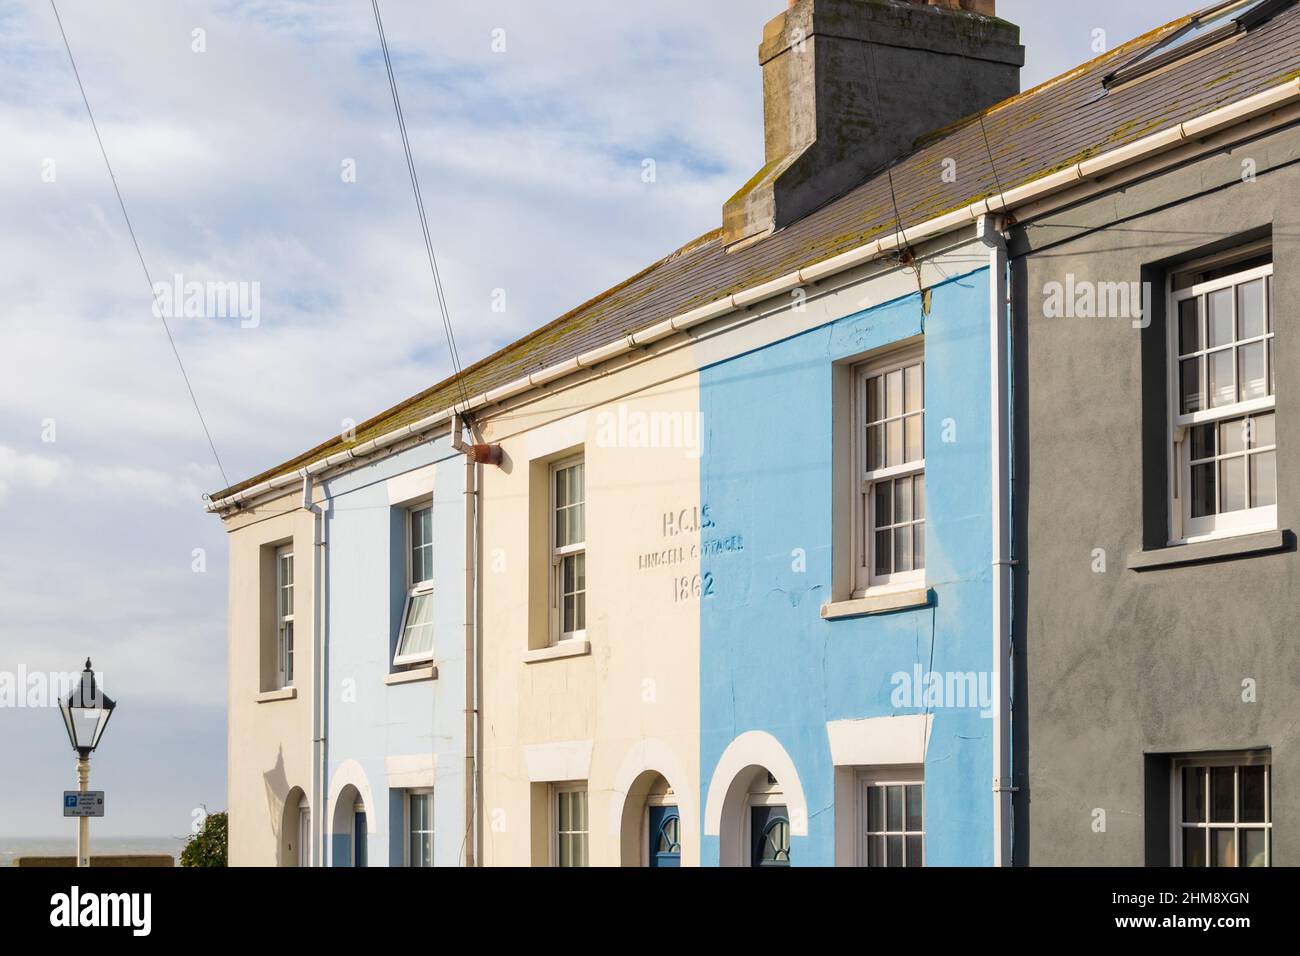 Row of colourful cottages, hastings, east sussex, uk Stock Photo